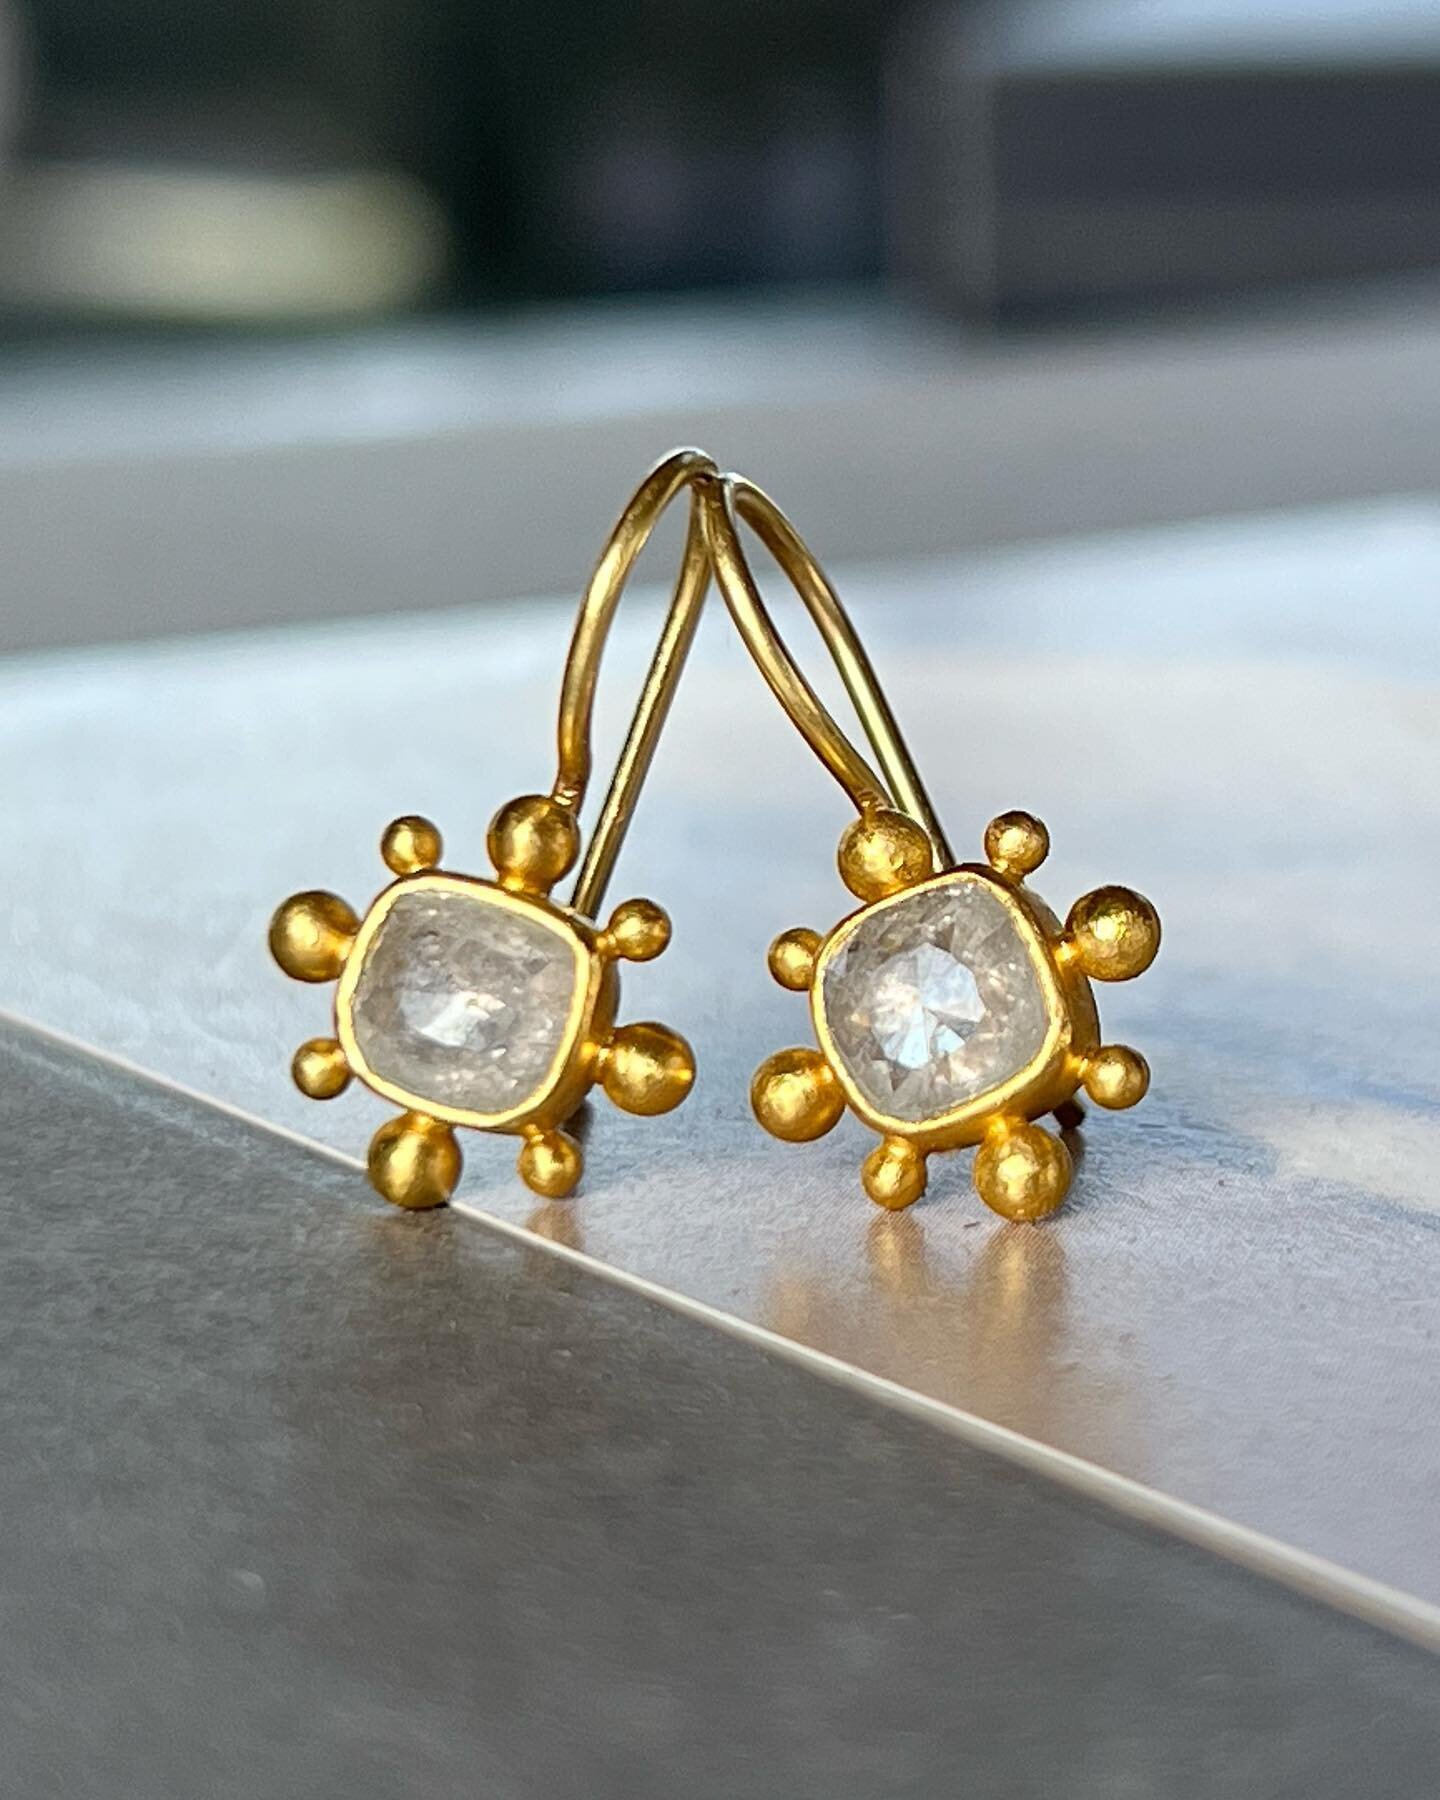 Back in stock! Protozoa earrings with icy white diamonds. Everyday earrings that literally work with everything. You will never want to take them off. 

There is only one pair so grab them while you can. DM for details. 

#lindahoj #lindahojdesigns 
